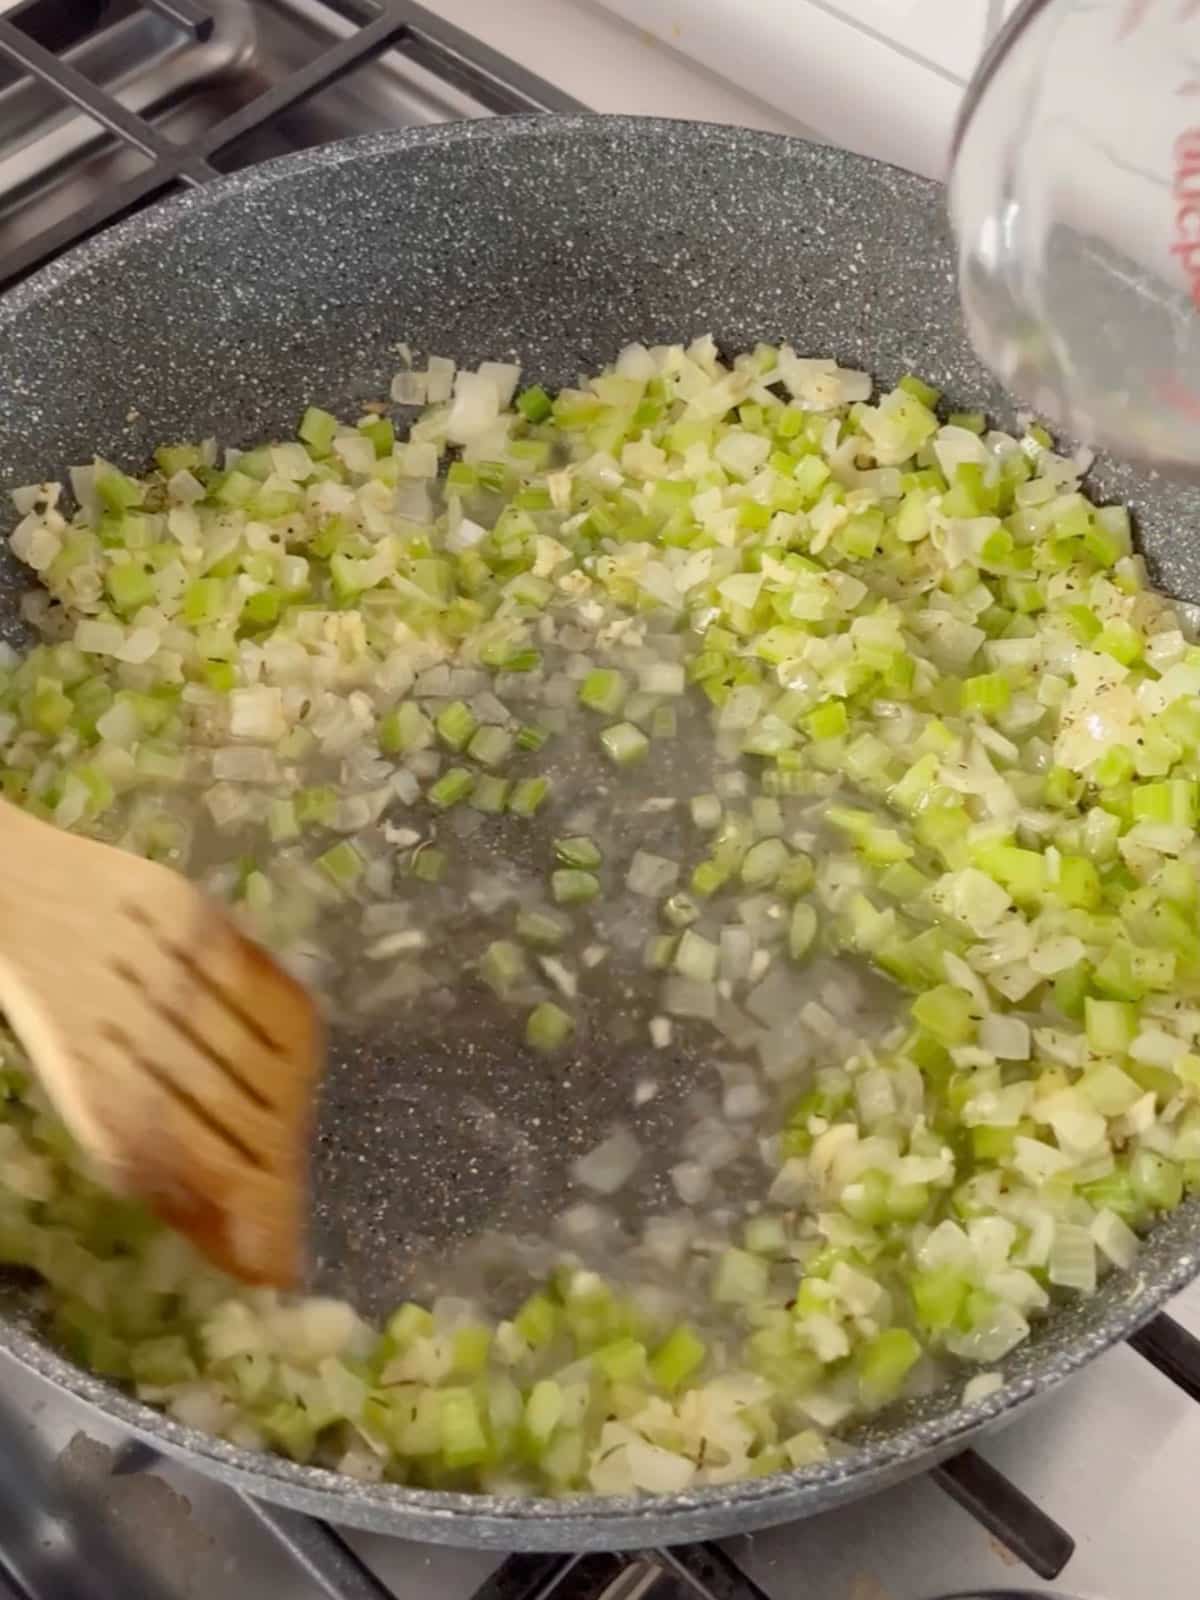 A wooden spoon deglazing the pan of celery and onion with white wine.